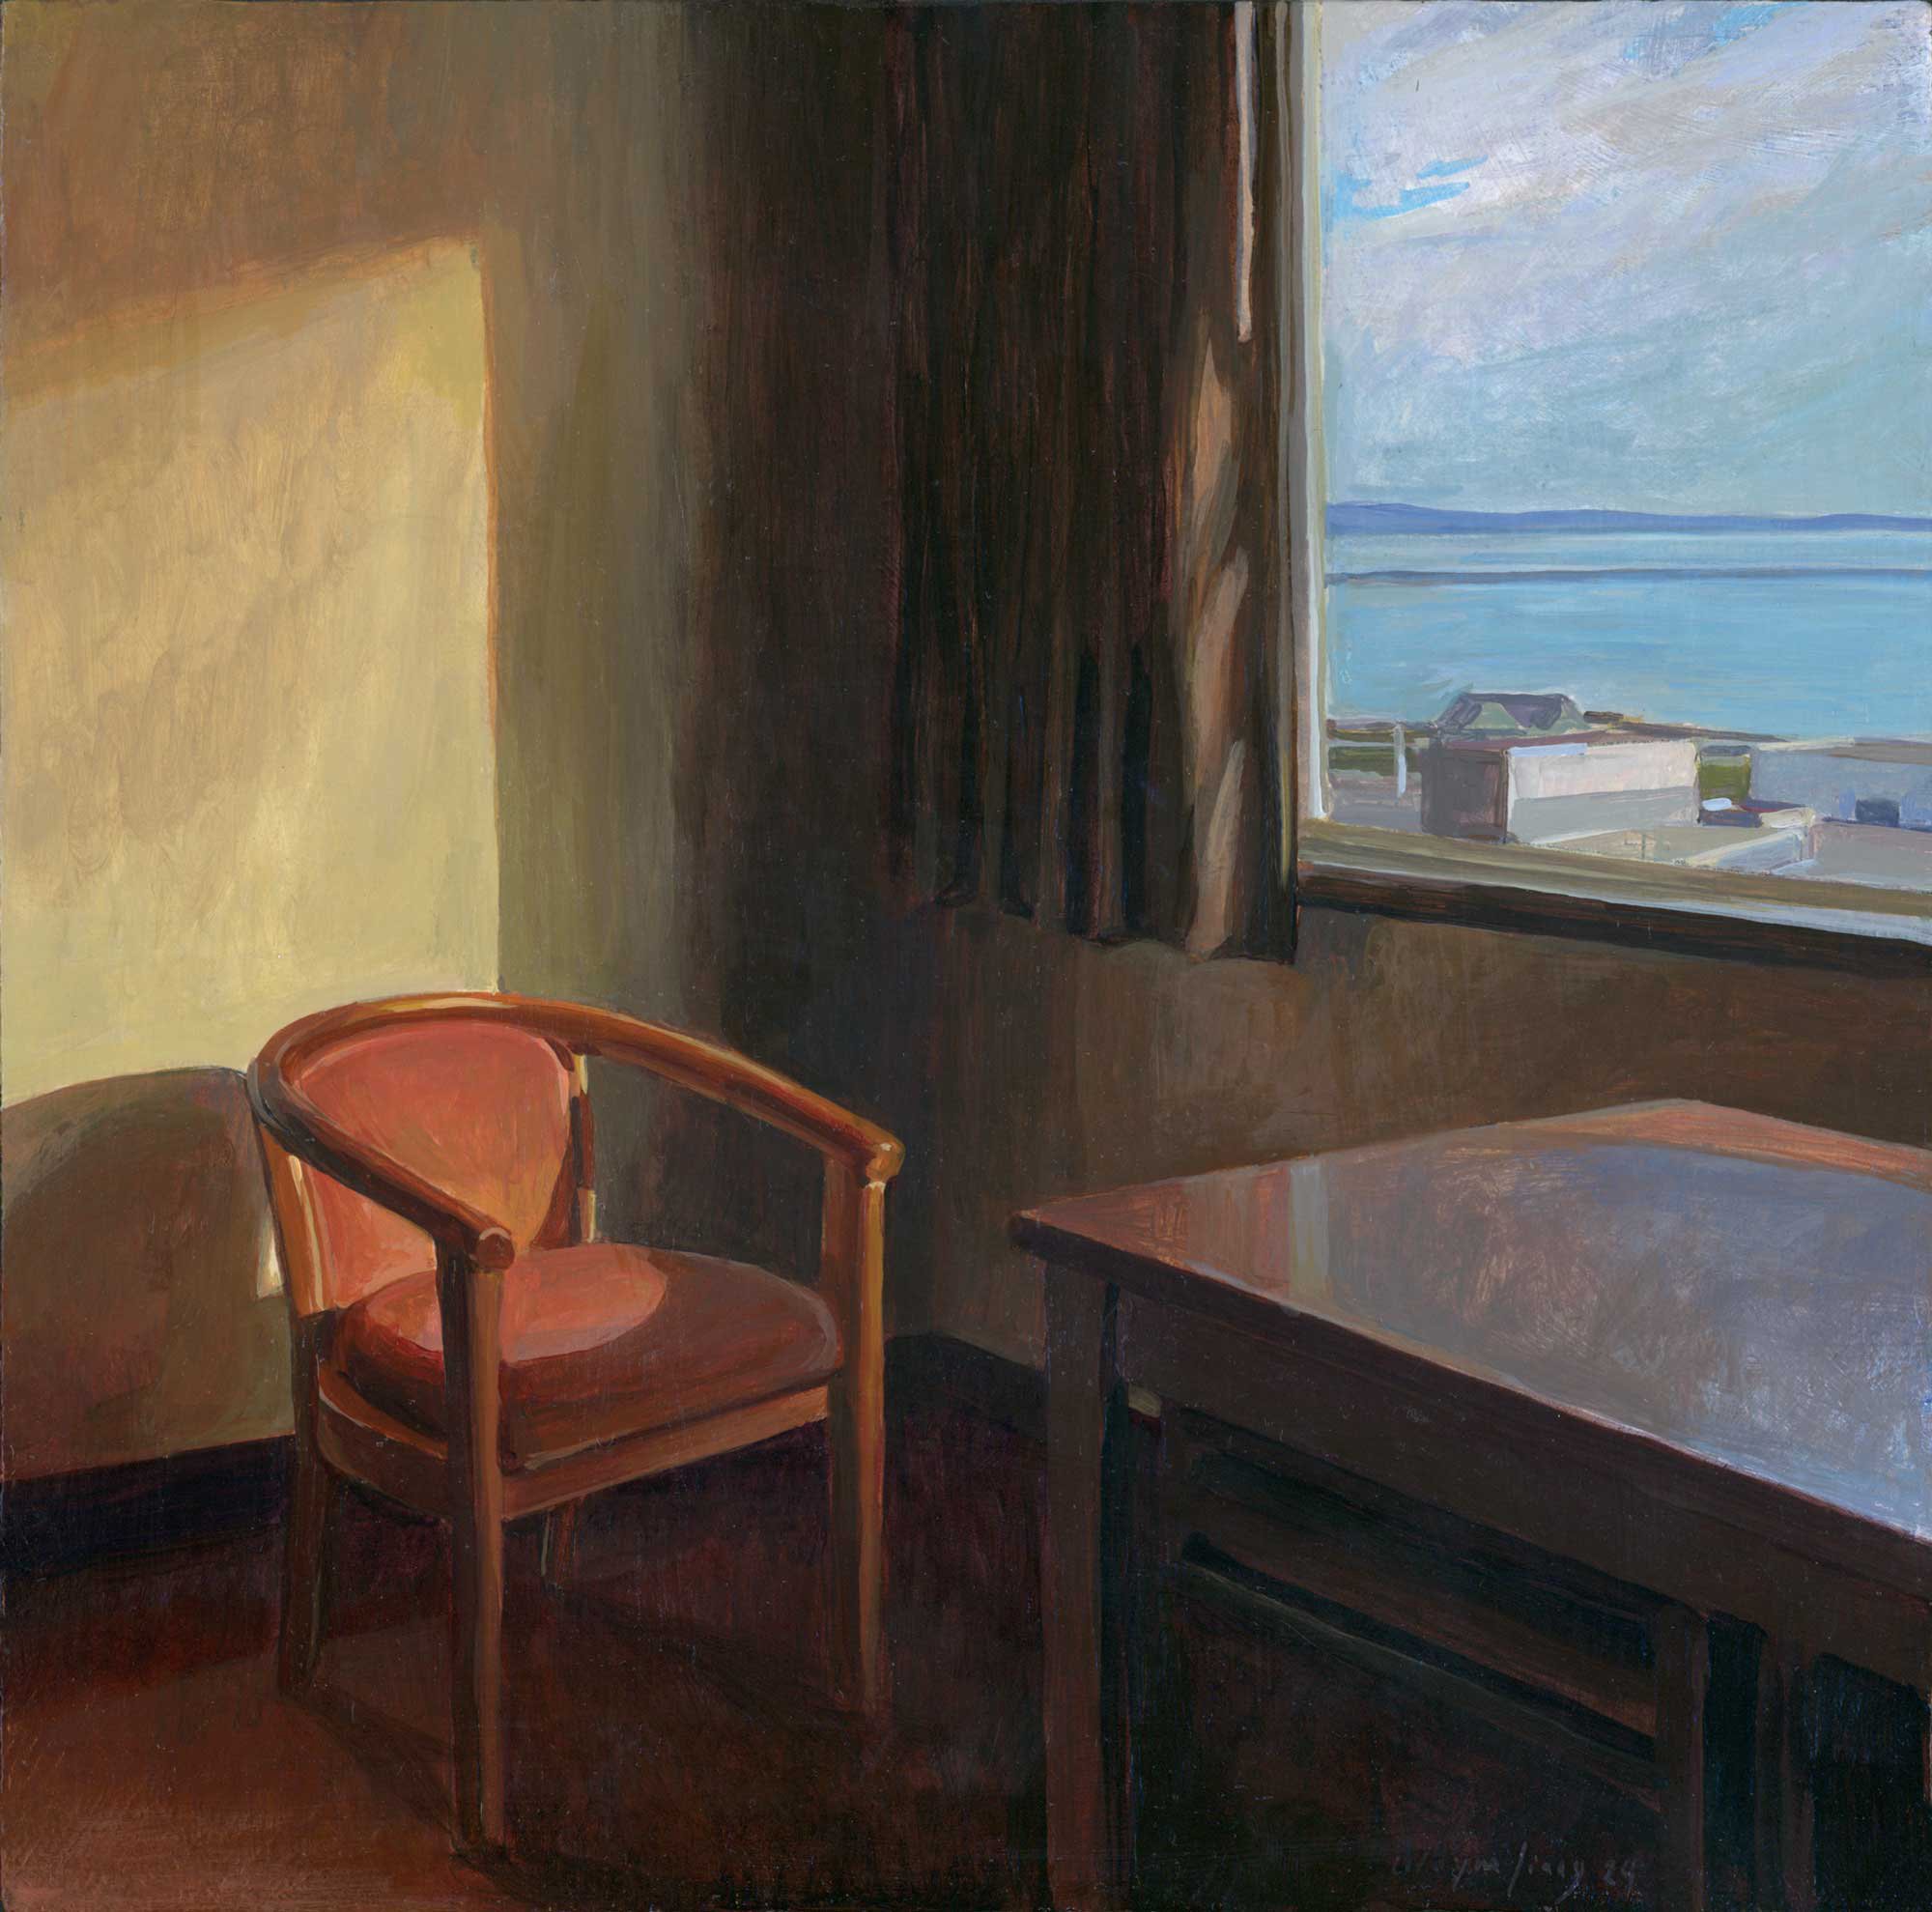 Chair and Table by the Window by Wayne Jiang